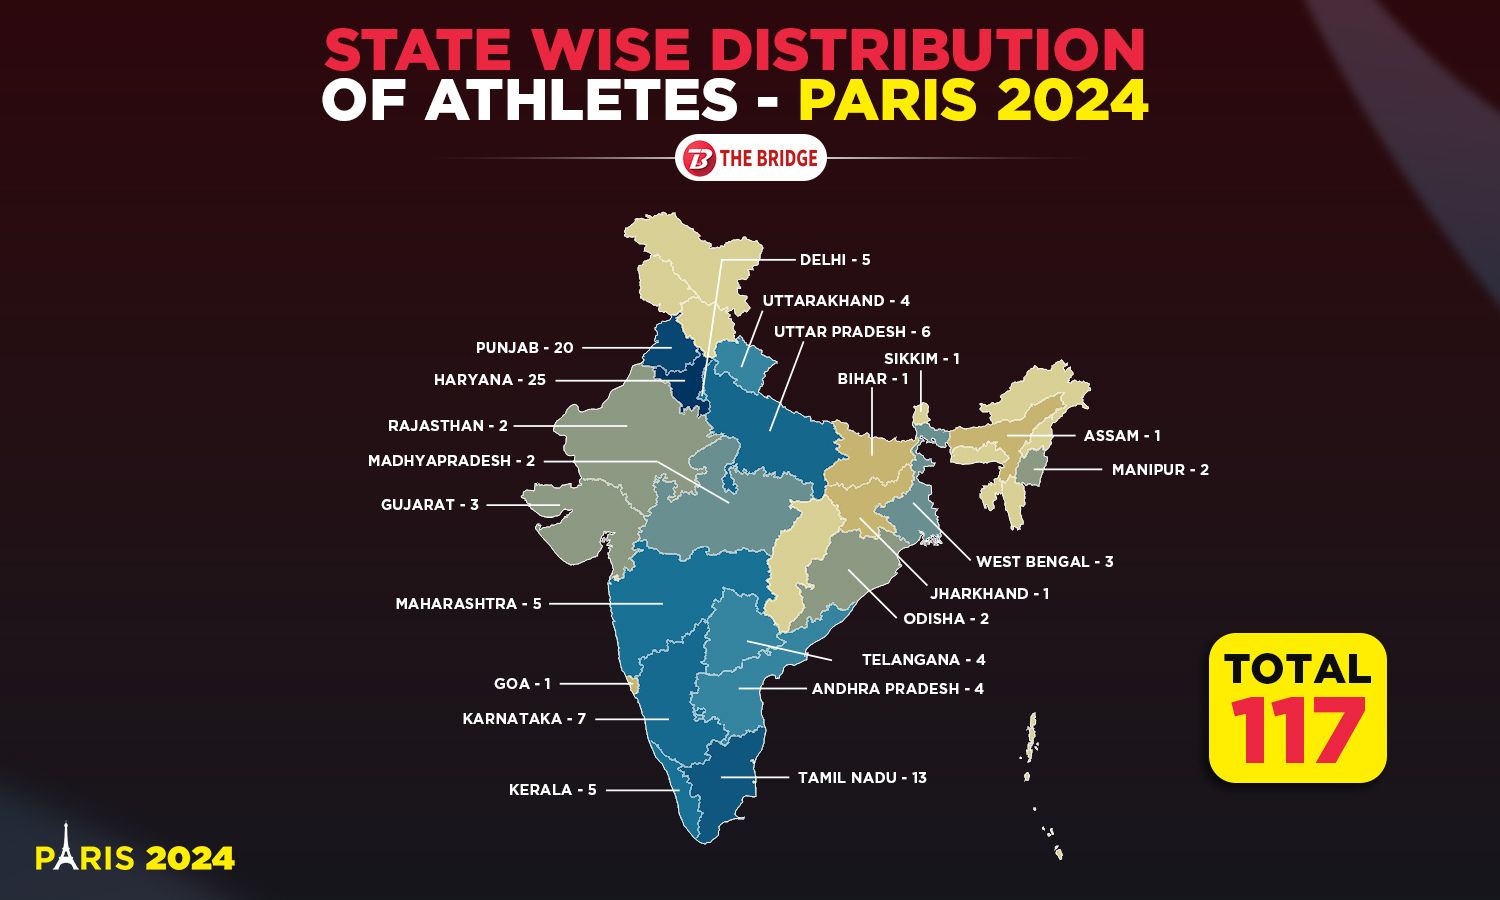 State-wise distribution of Indian athletes